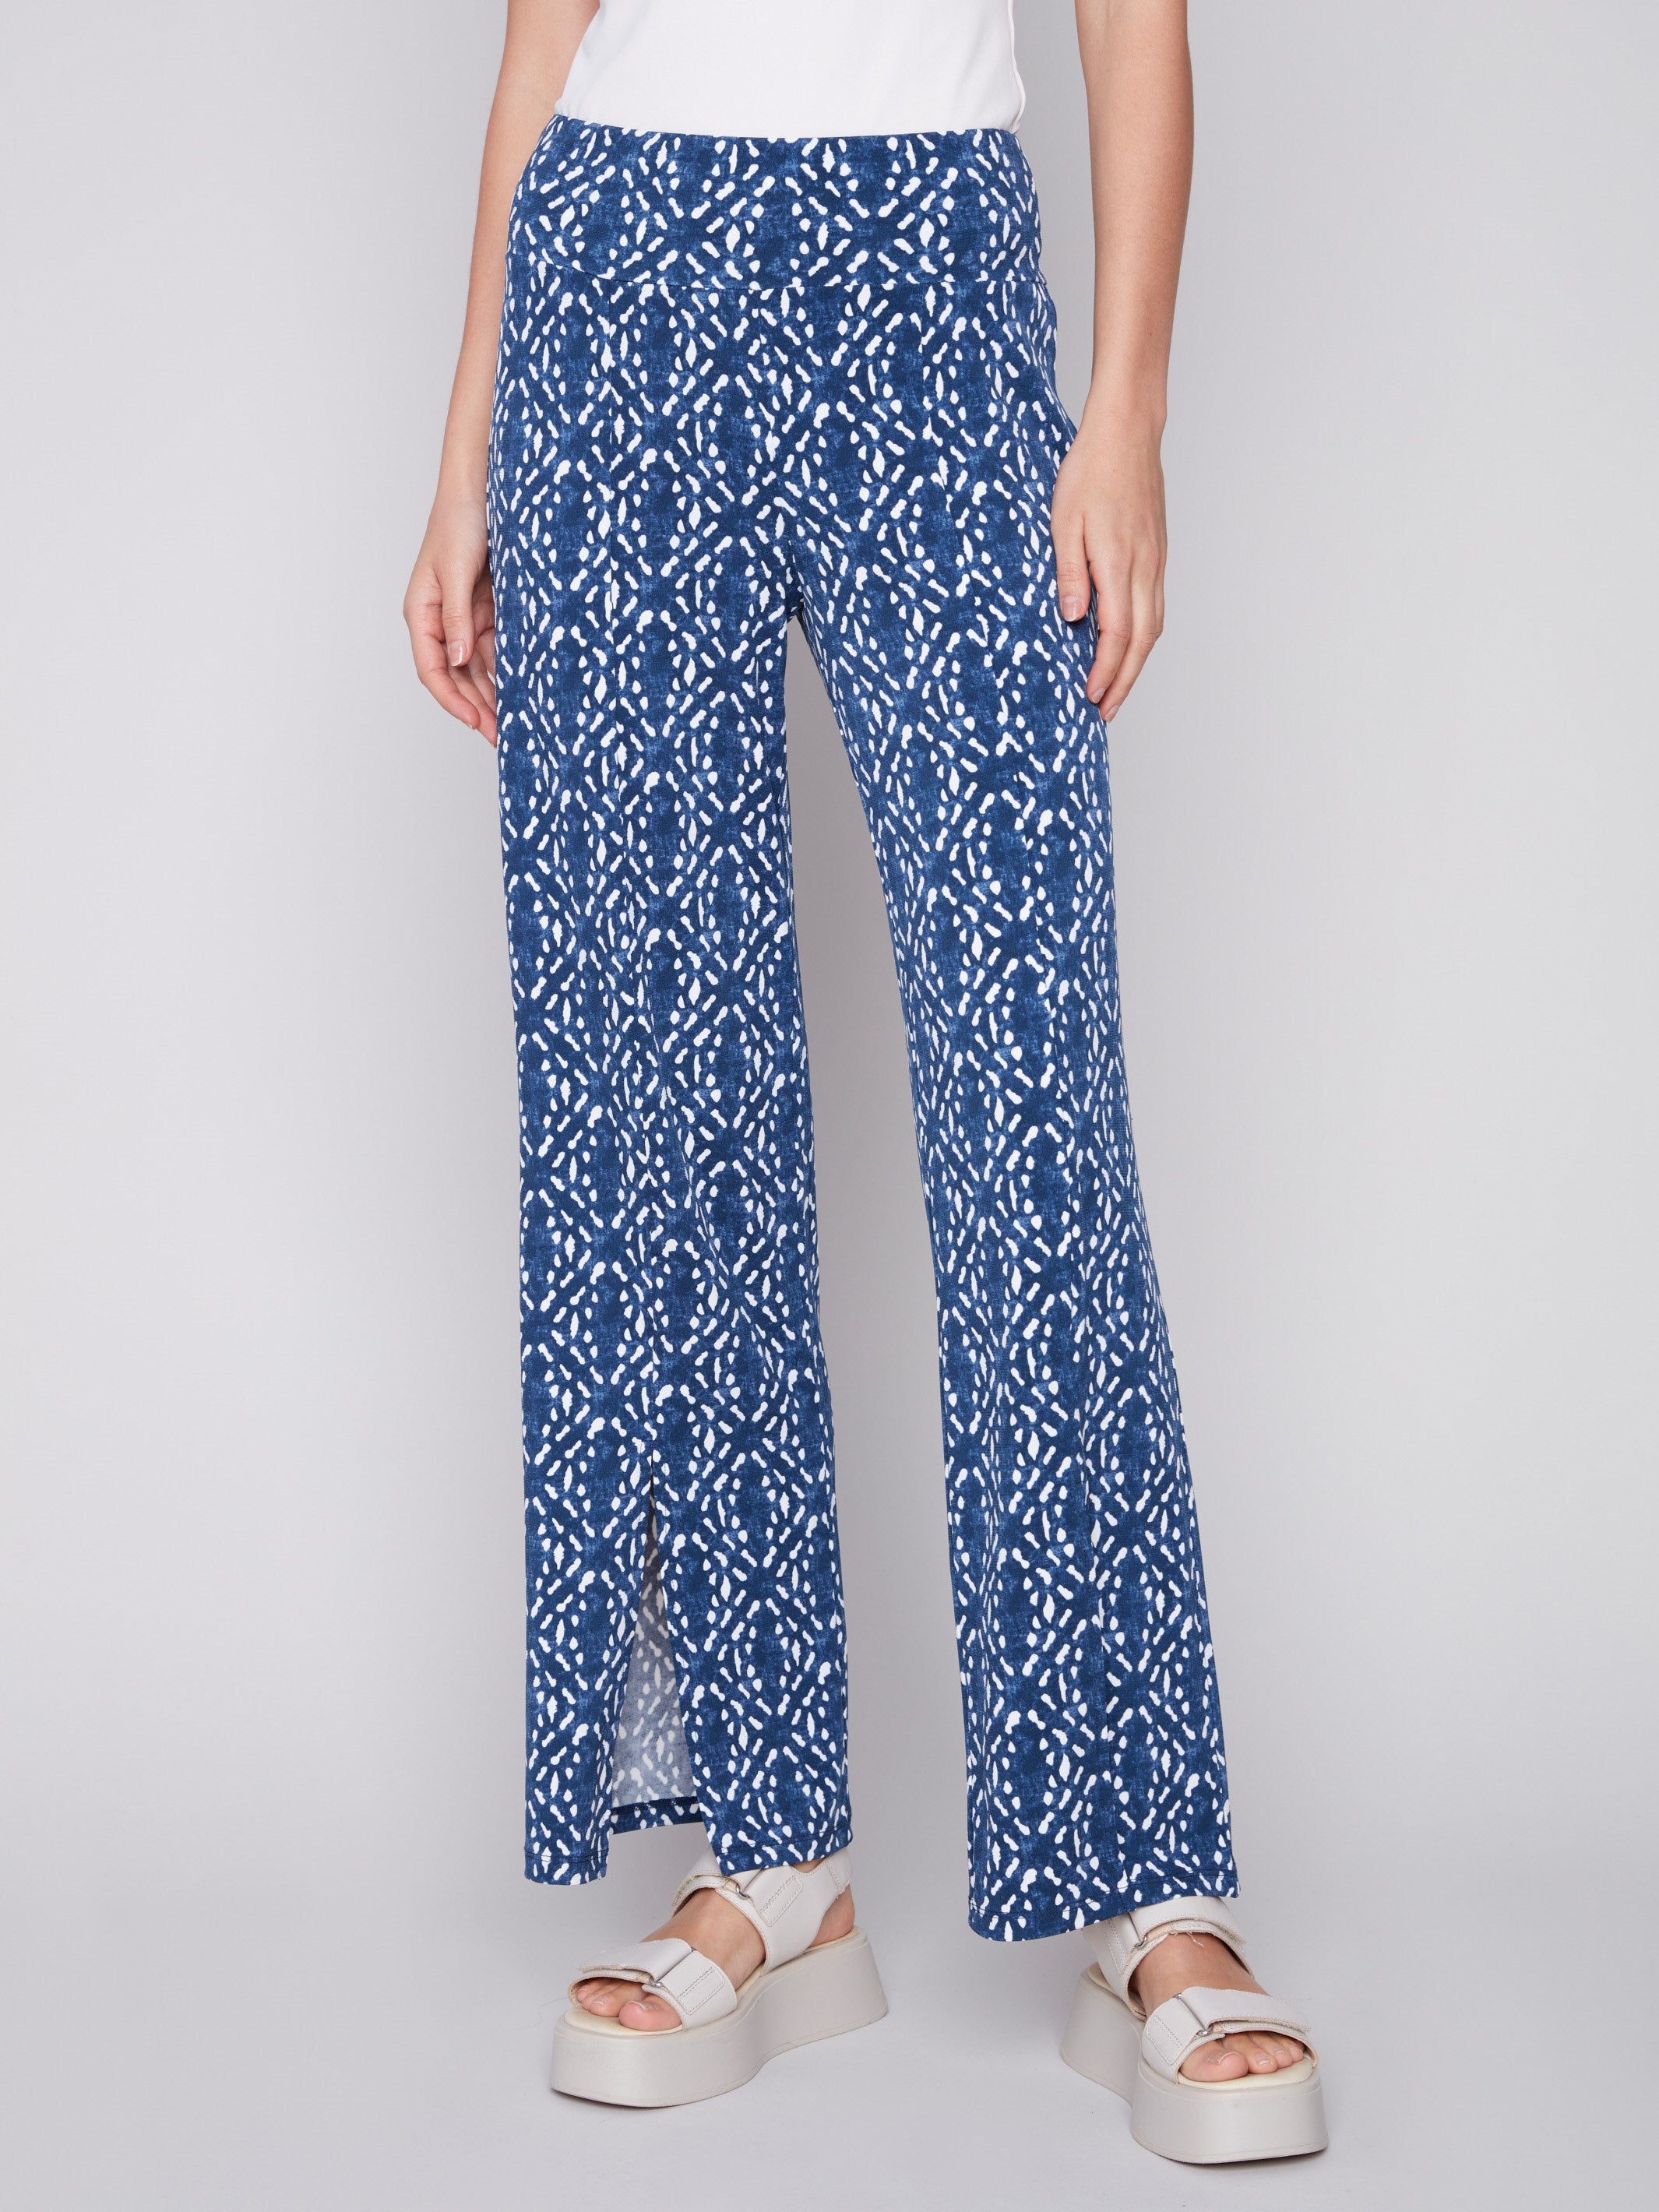 Printed Wide Leg Pants with Front Slits - Indigo - Charlie B Collection Canada - Image 2